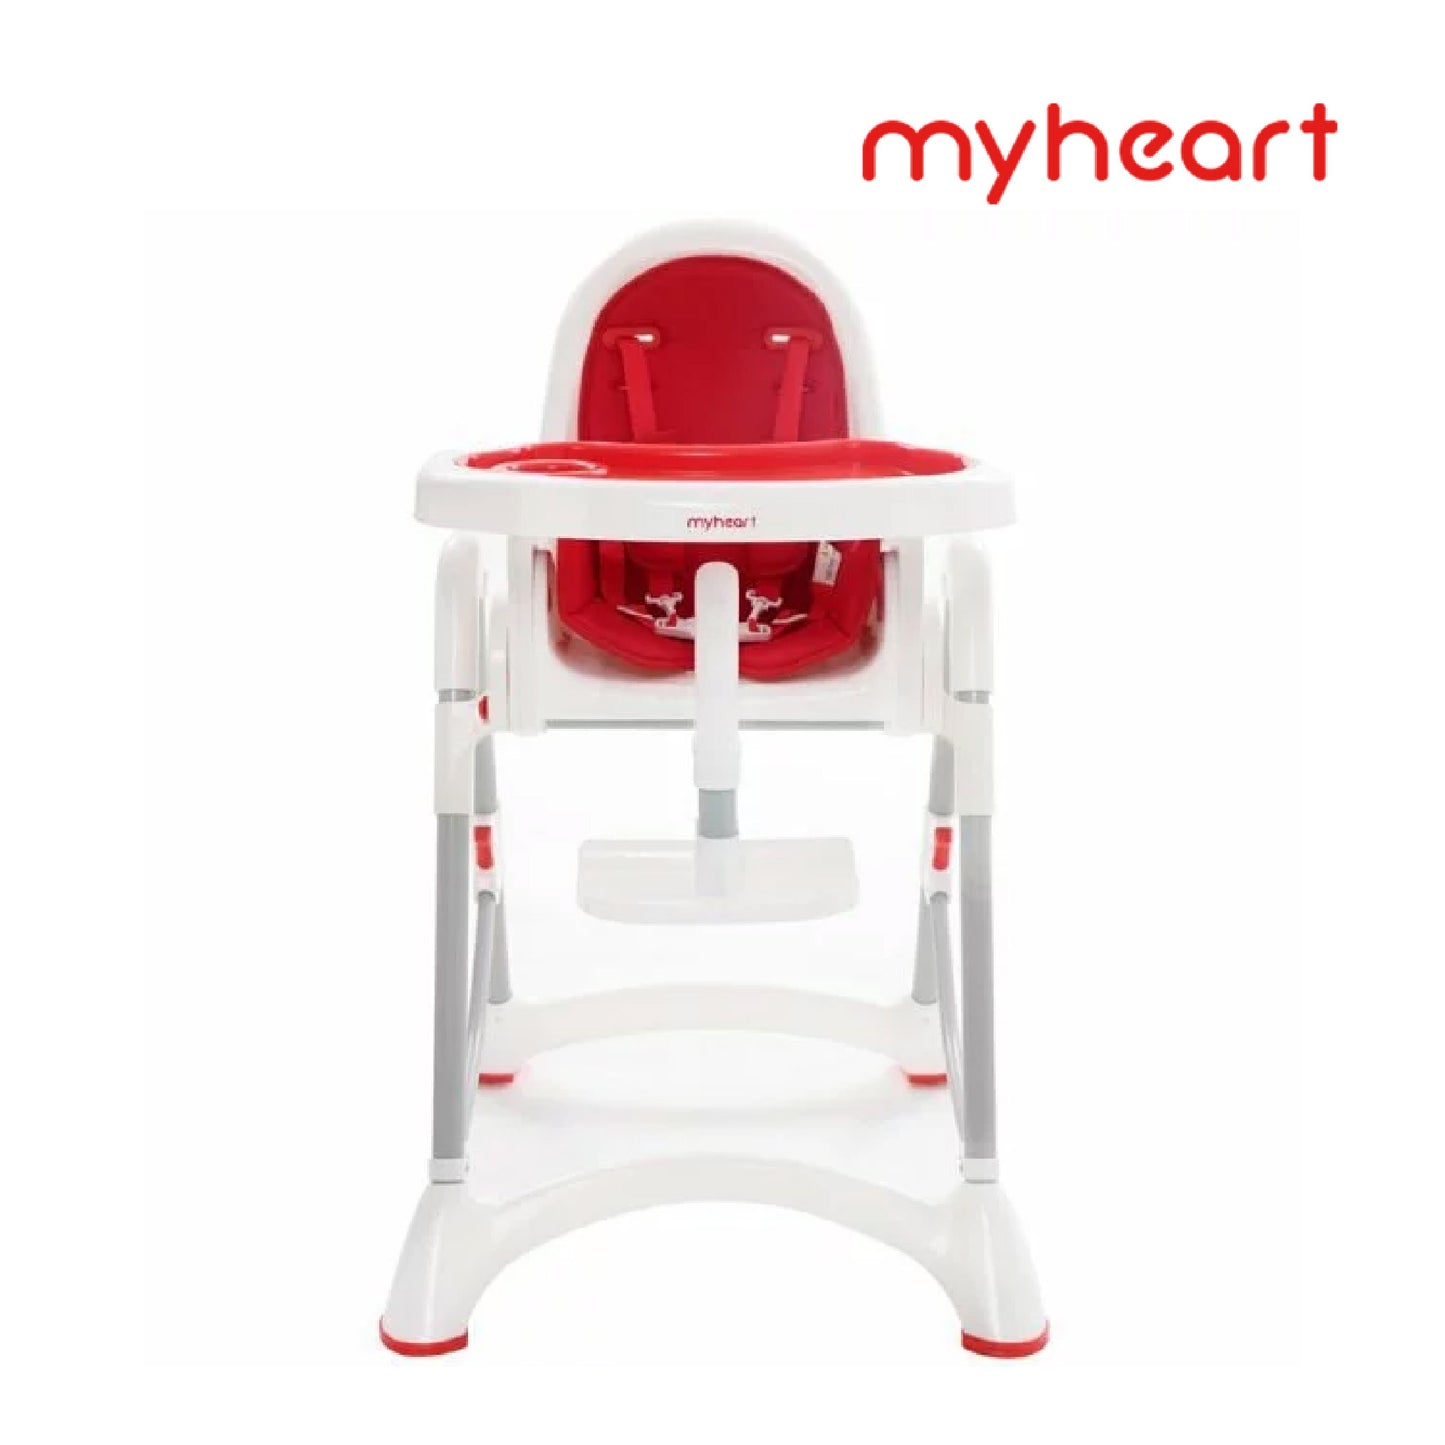 【myheart】Folding child safety dining chair-Apple red